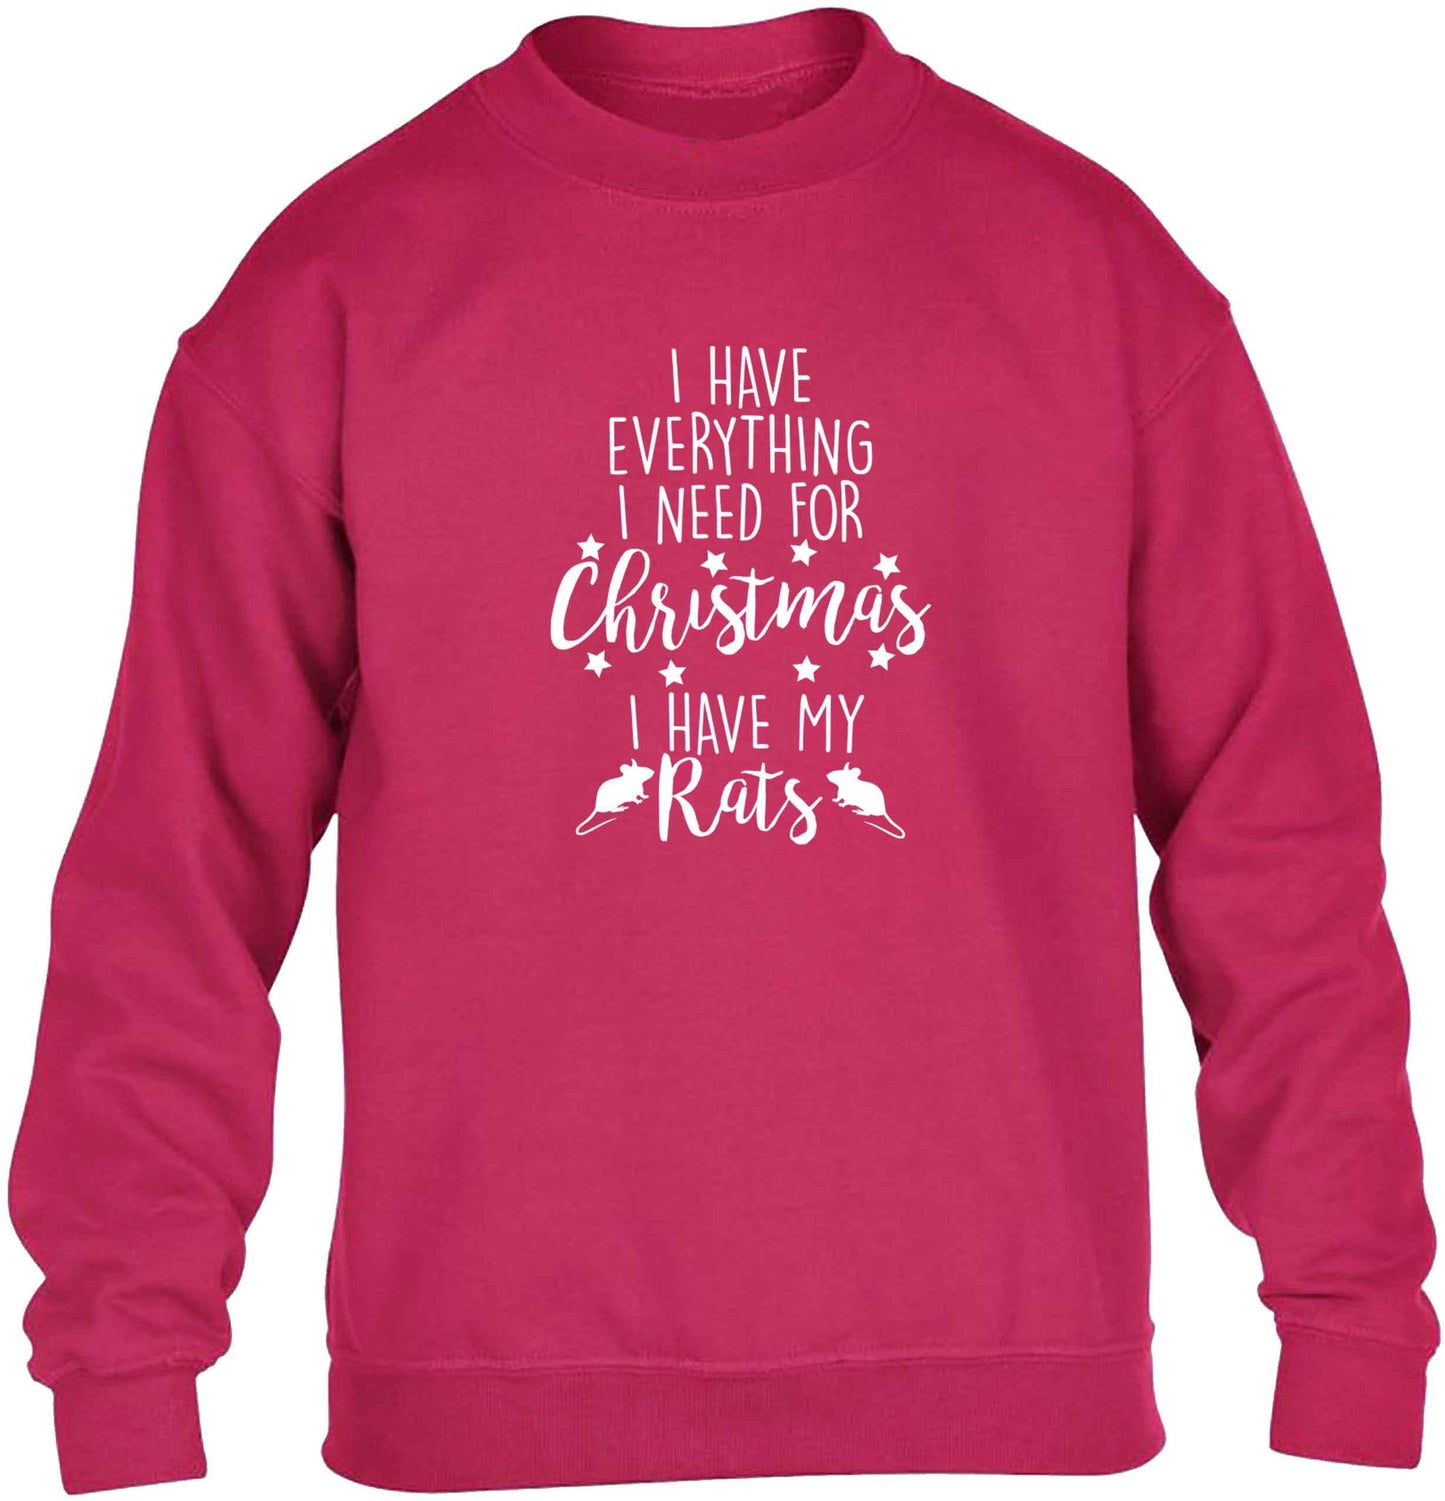 I have everything I need for Christmas I have my rats children's pink sweater 12-13 Years